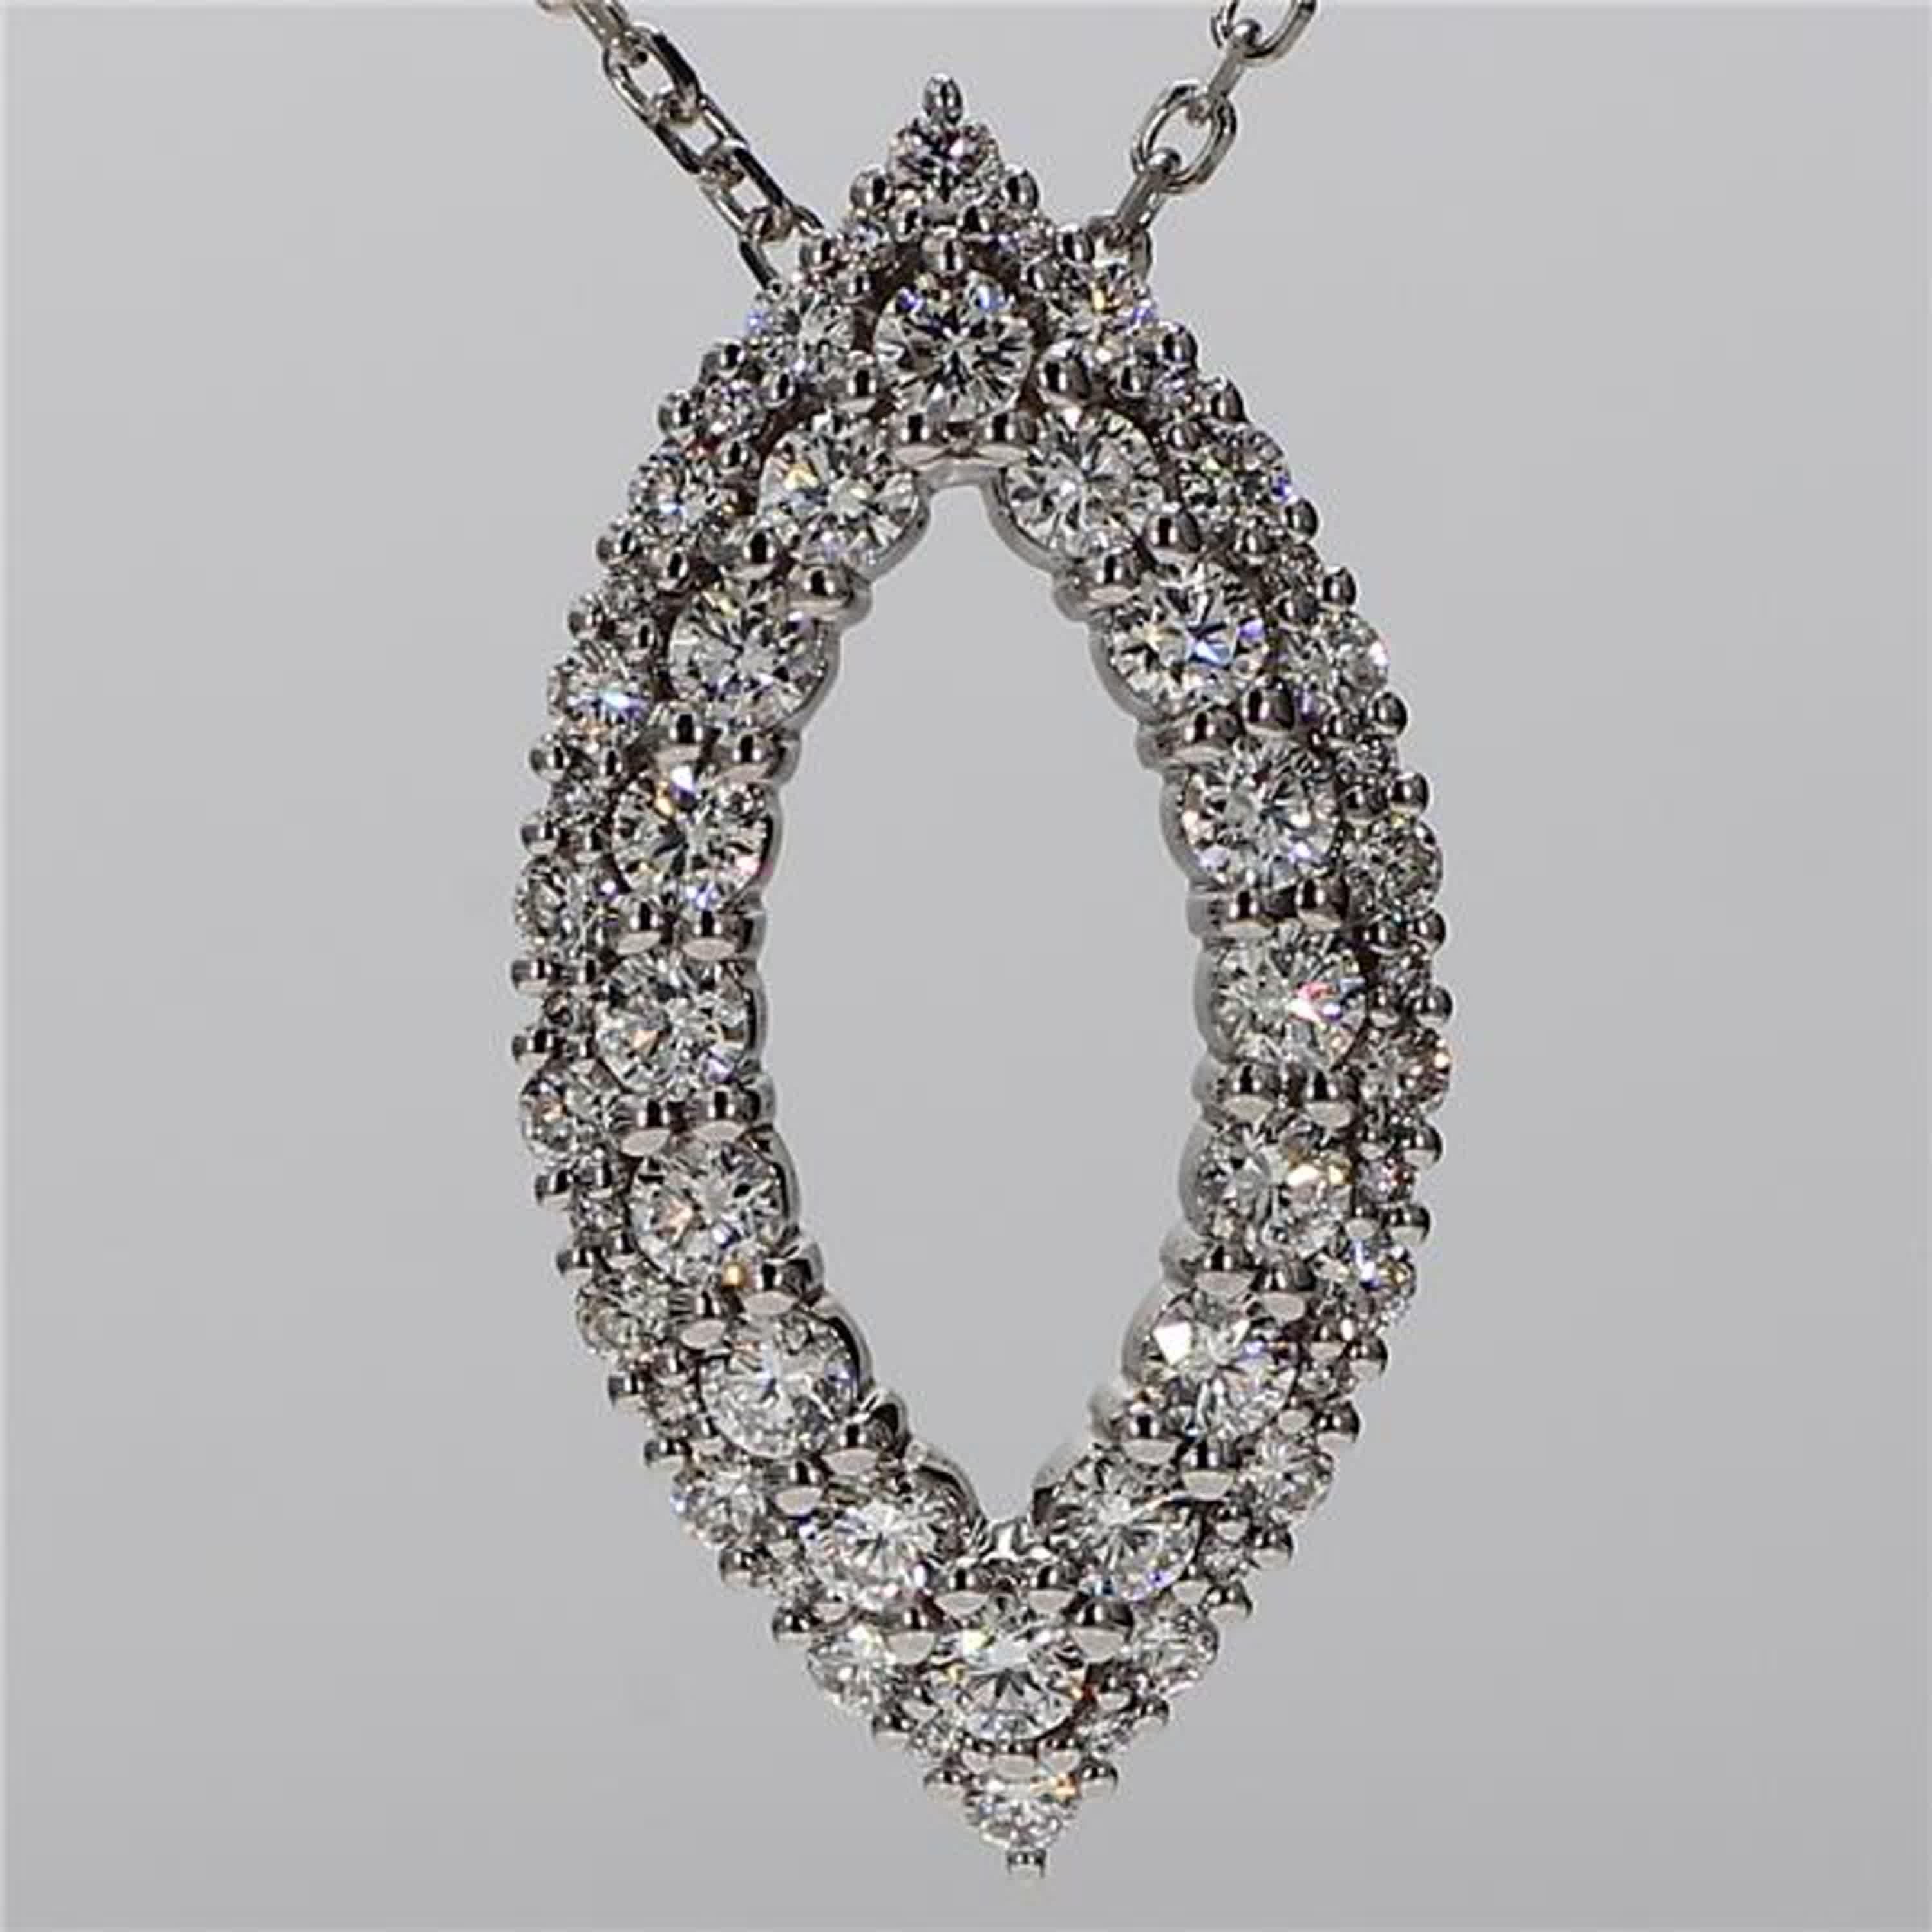 RareGemWorld's classic diamond pendant. Mounted in a beautiful 18K White Gold setting with natural round white diamond melee. This pendant is guaranteed to impress and enhance your personal collection.

Total Weight: 1.23cts

Length x Width: 27.2 x